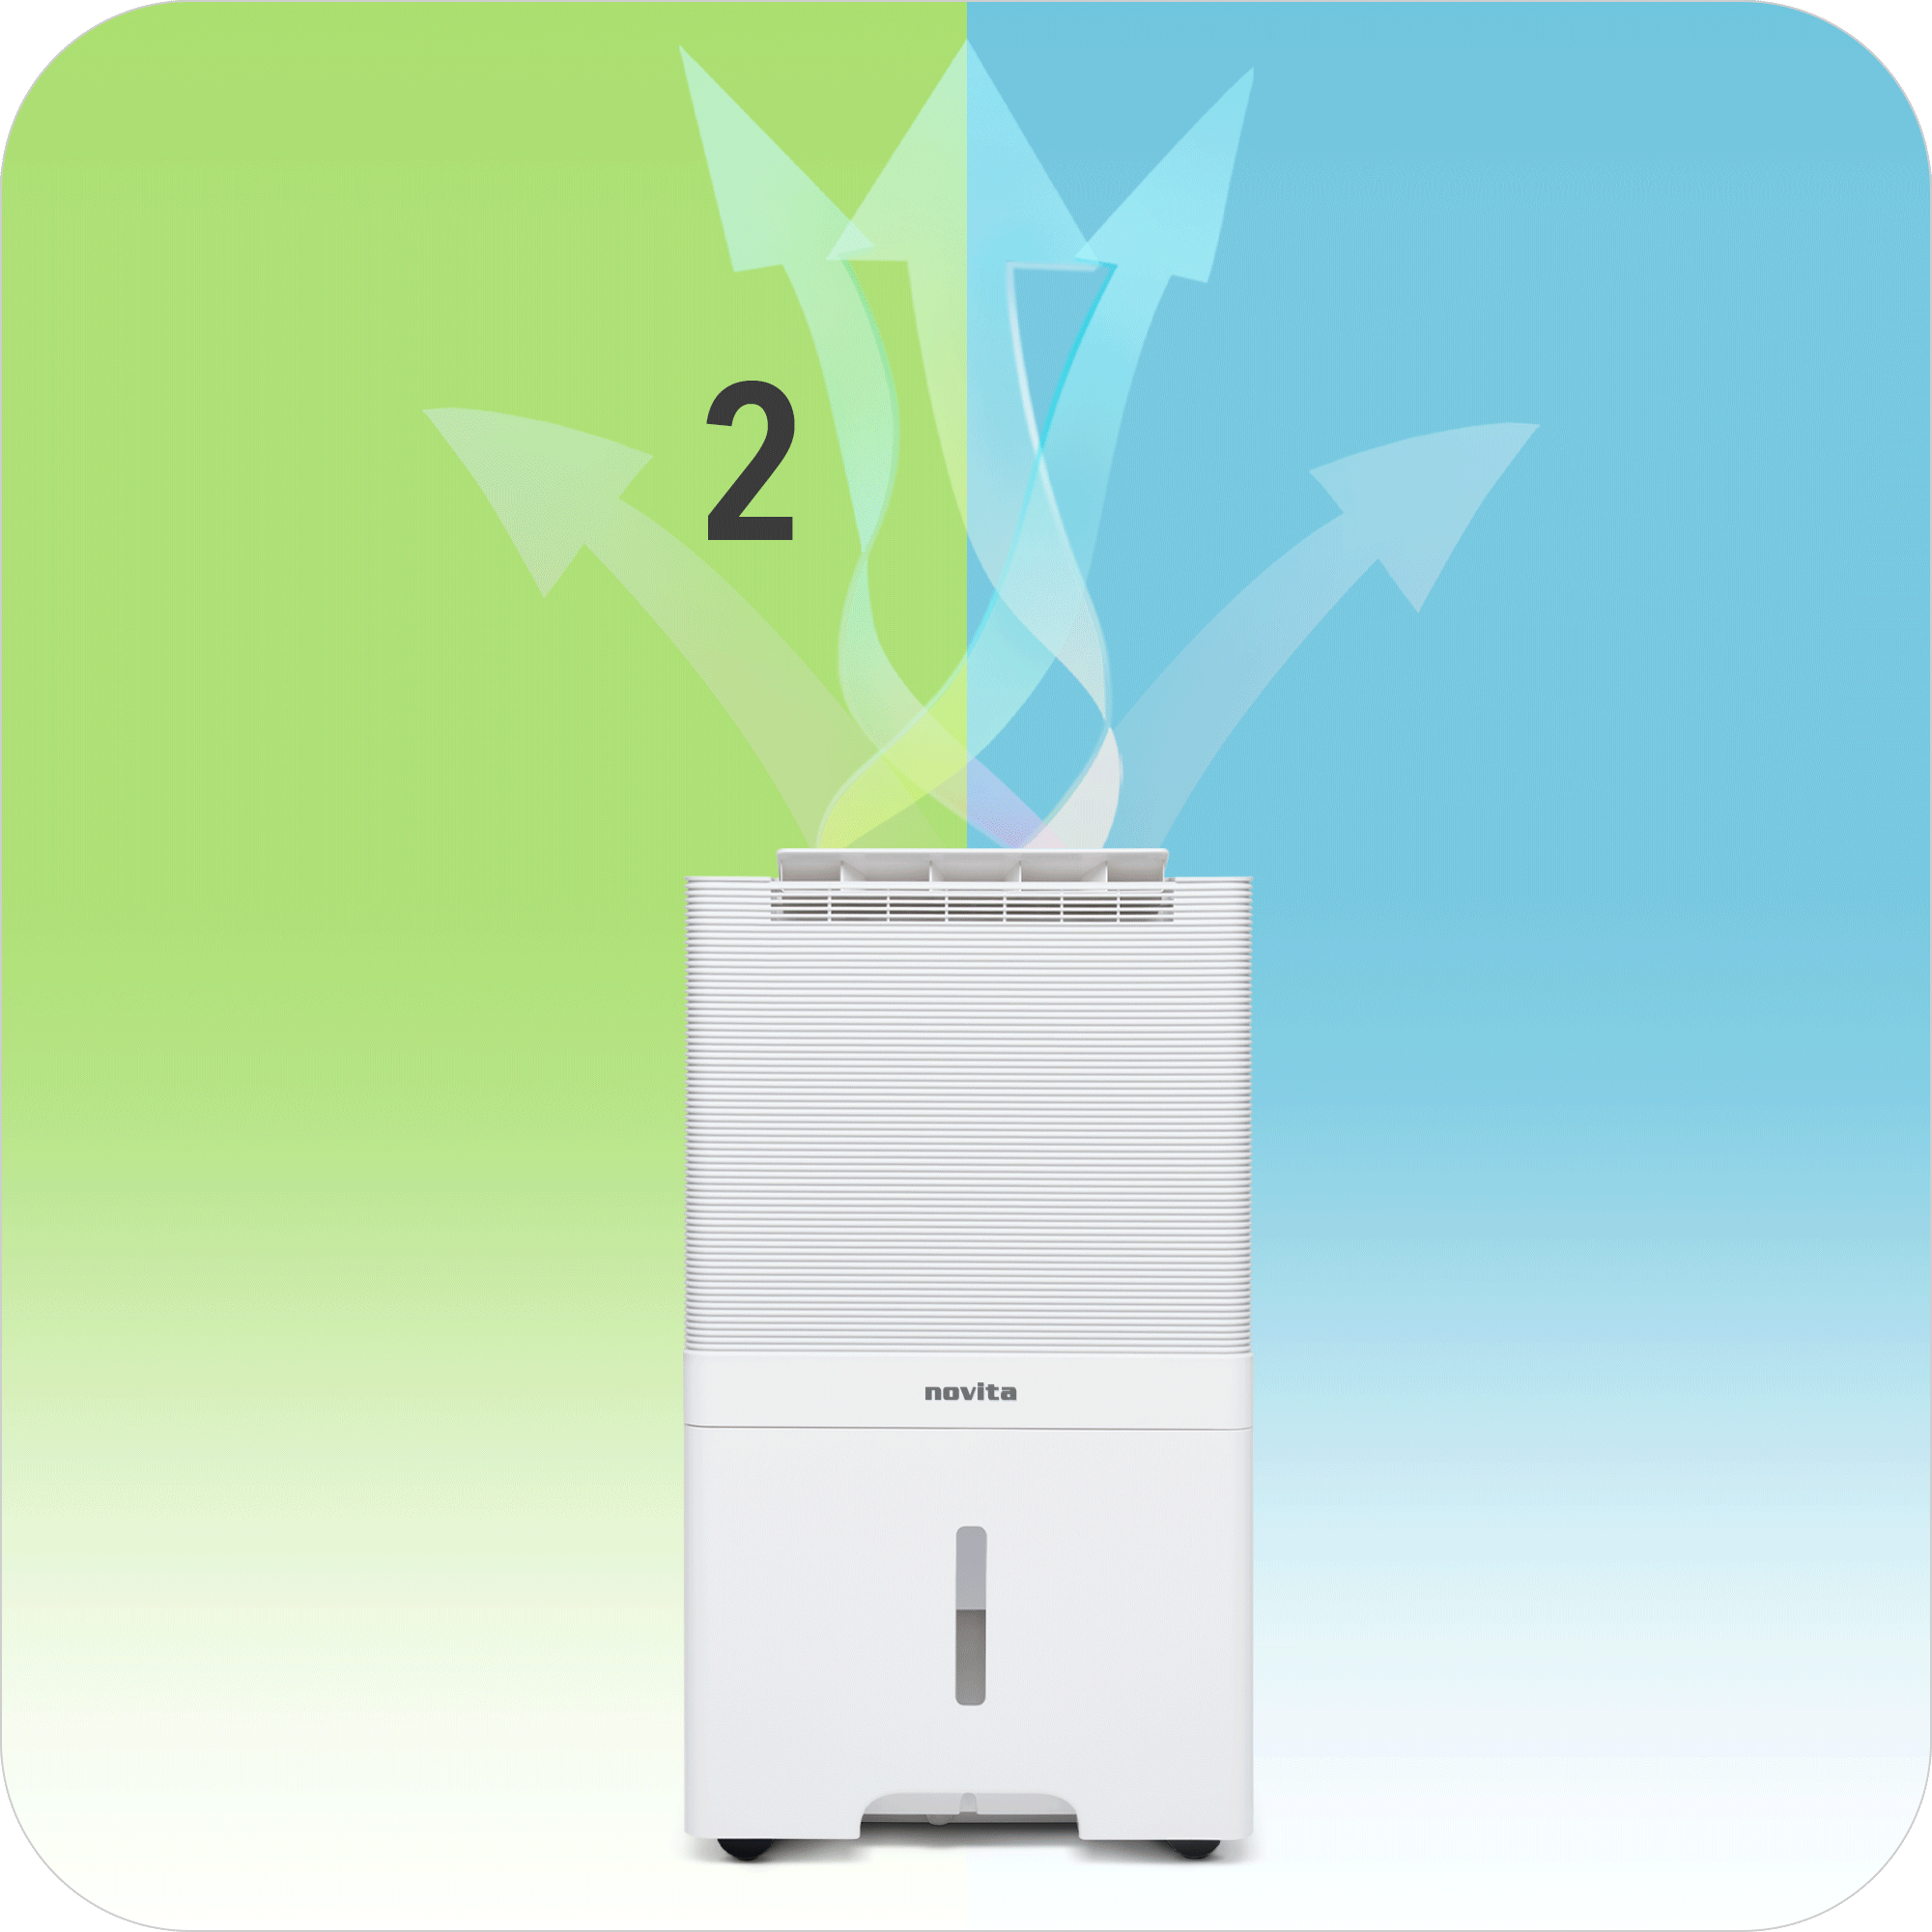 A novita Dehumidifier + Air Purifier The 2-In-1 ND60 with two arrows pointing in different directions.